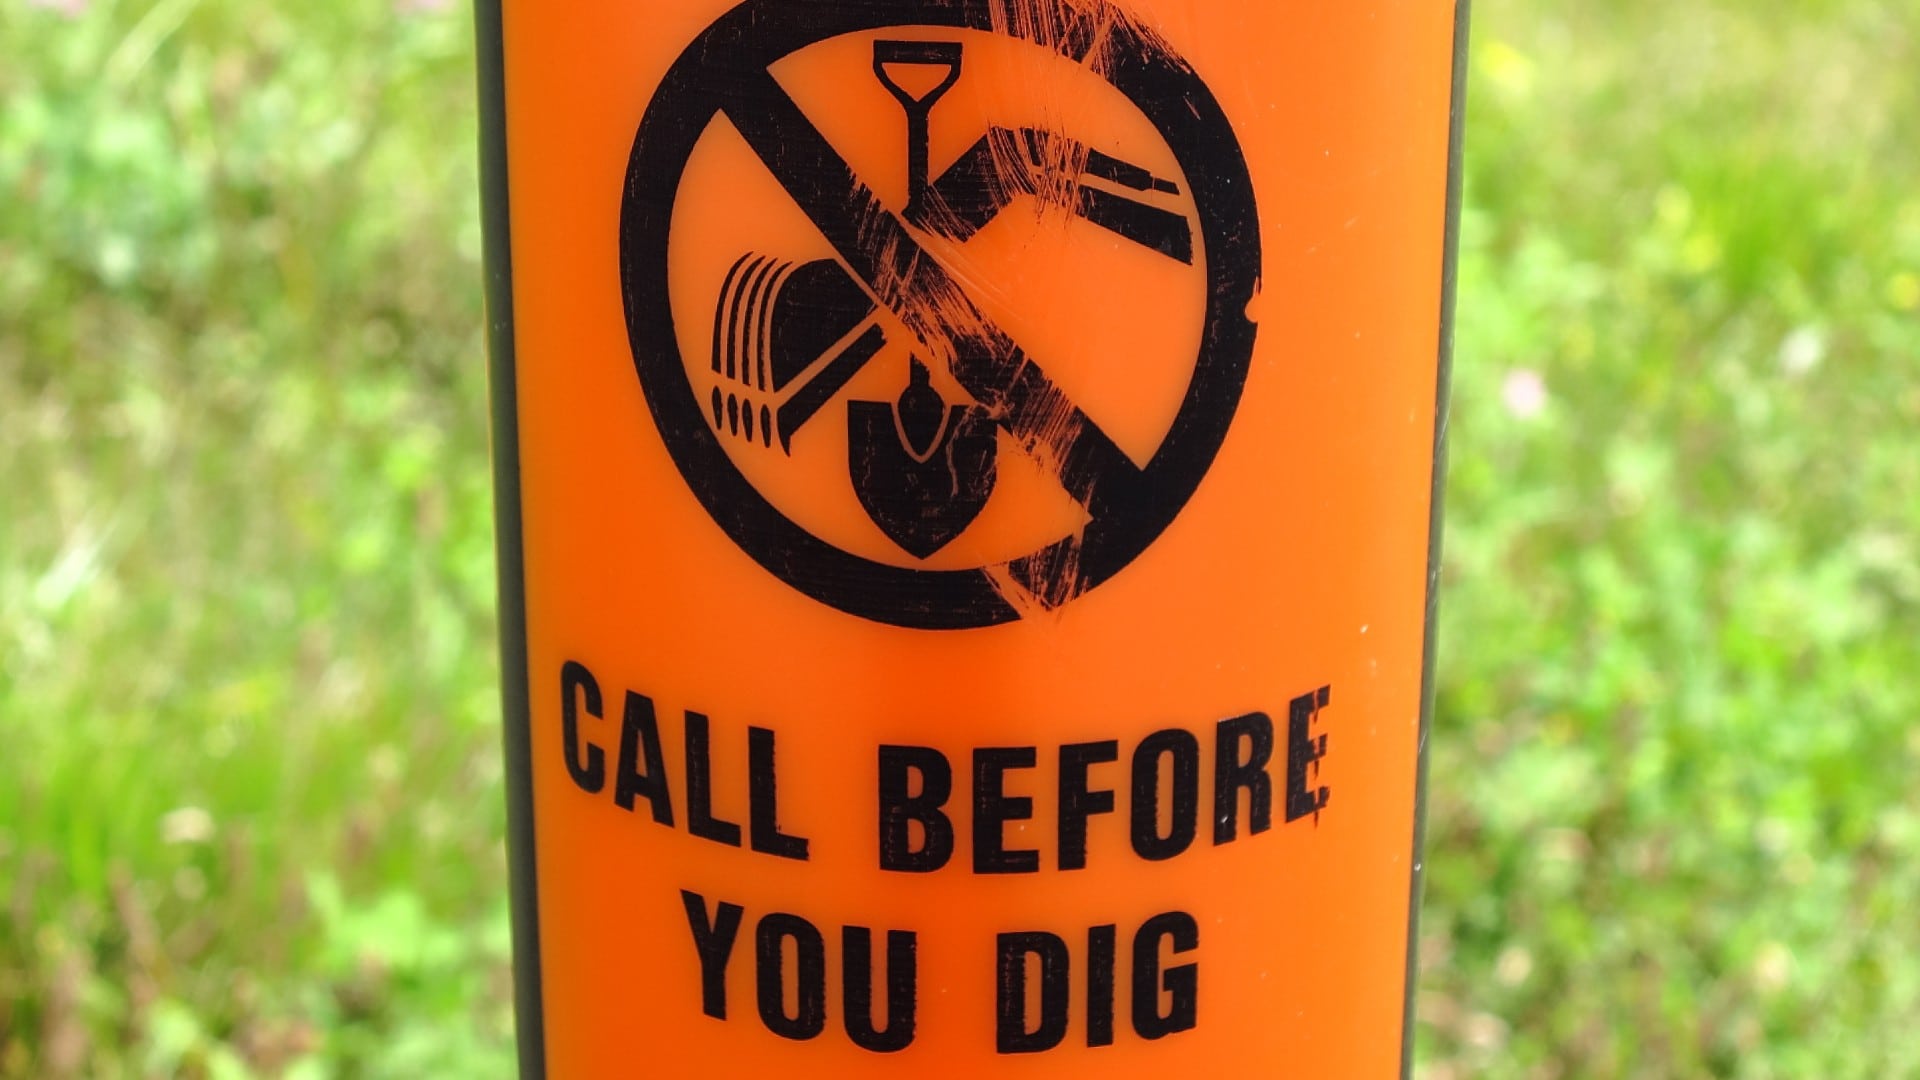 a call before you dig sign">